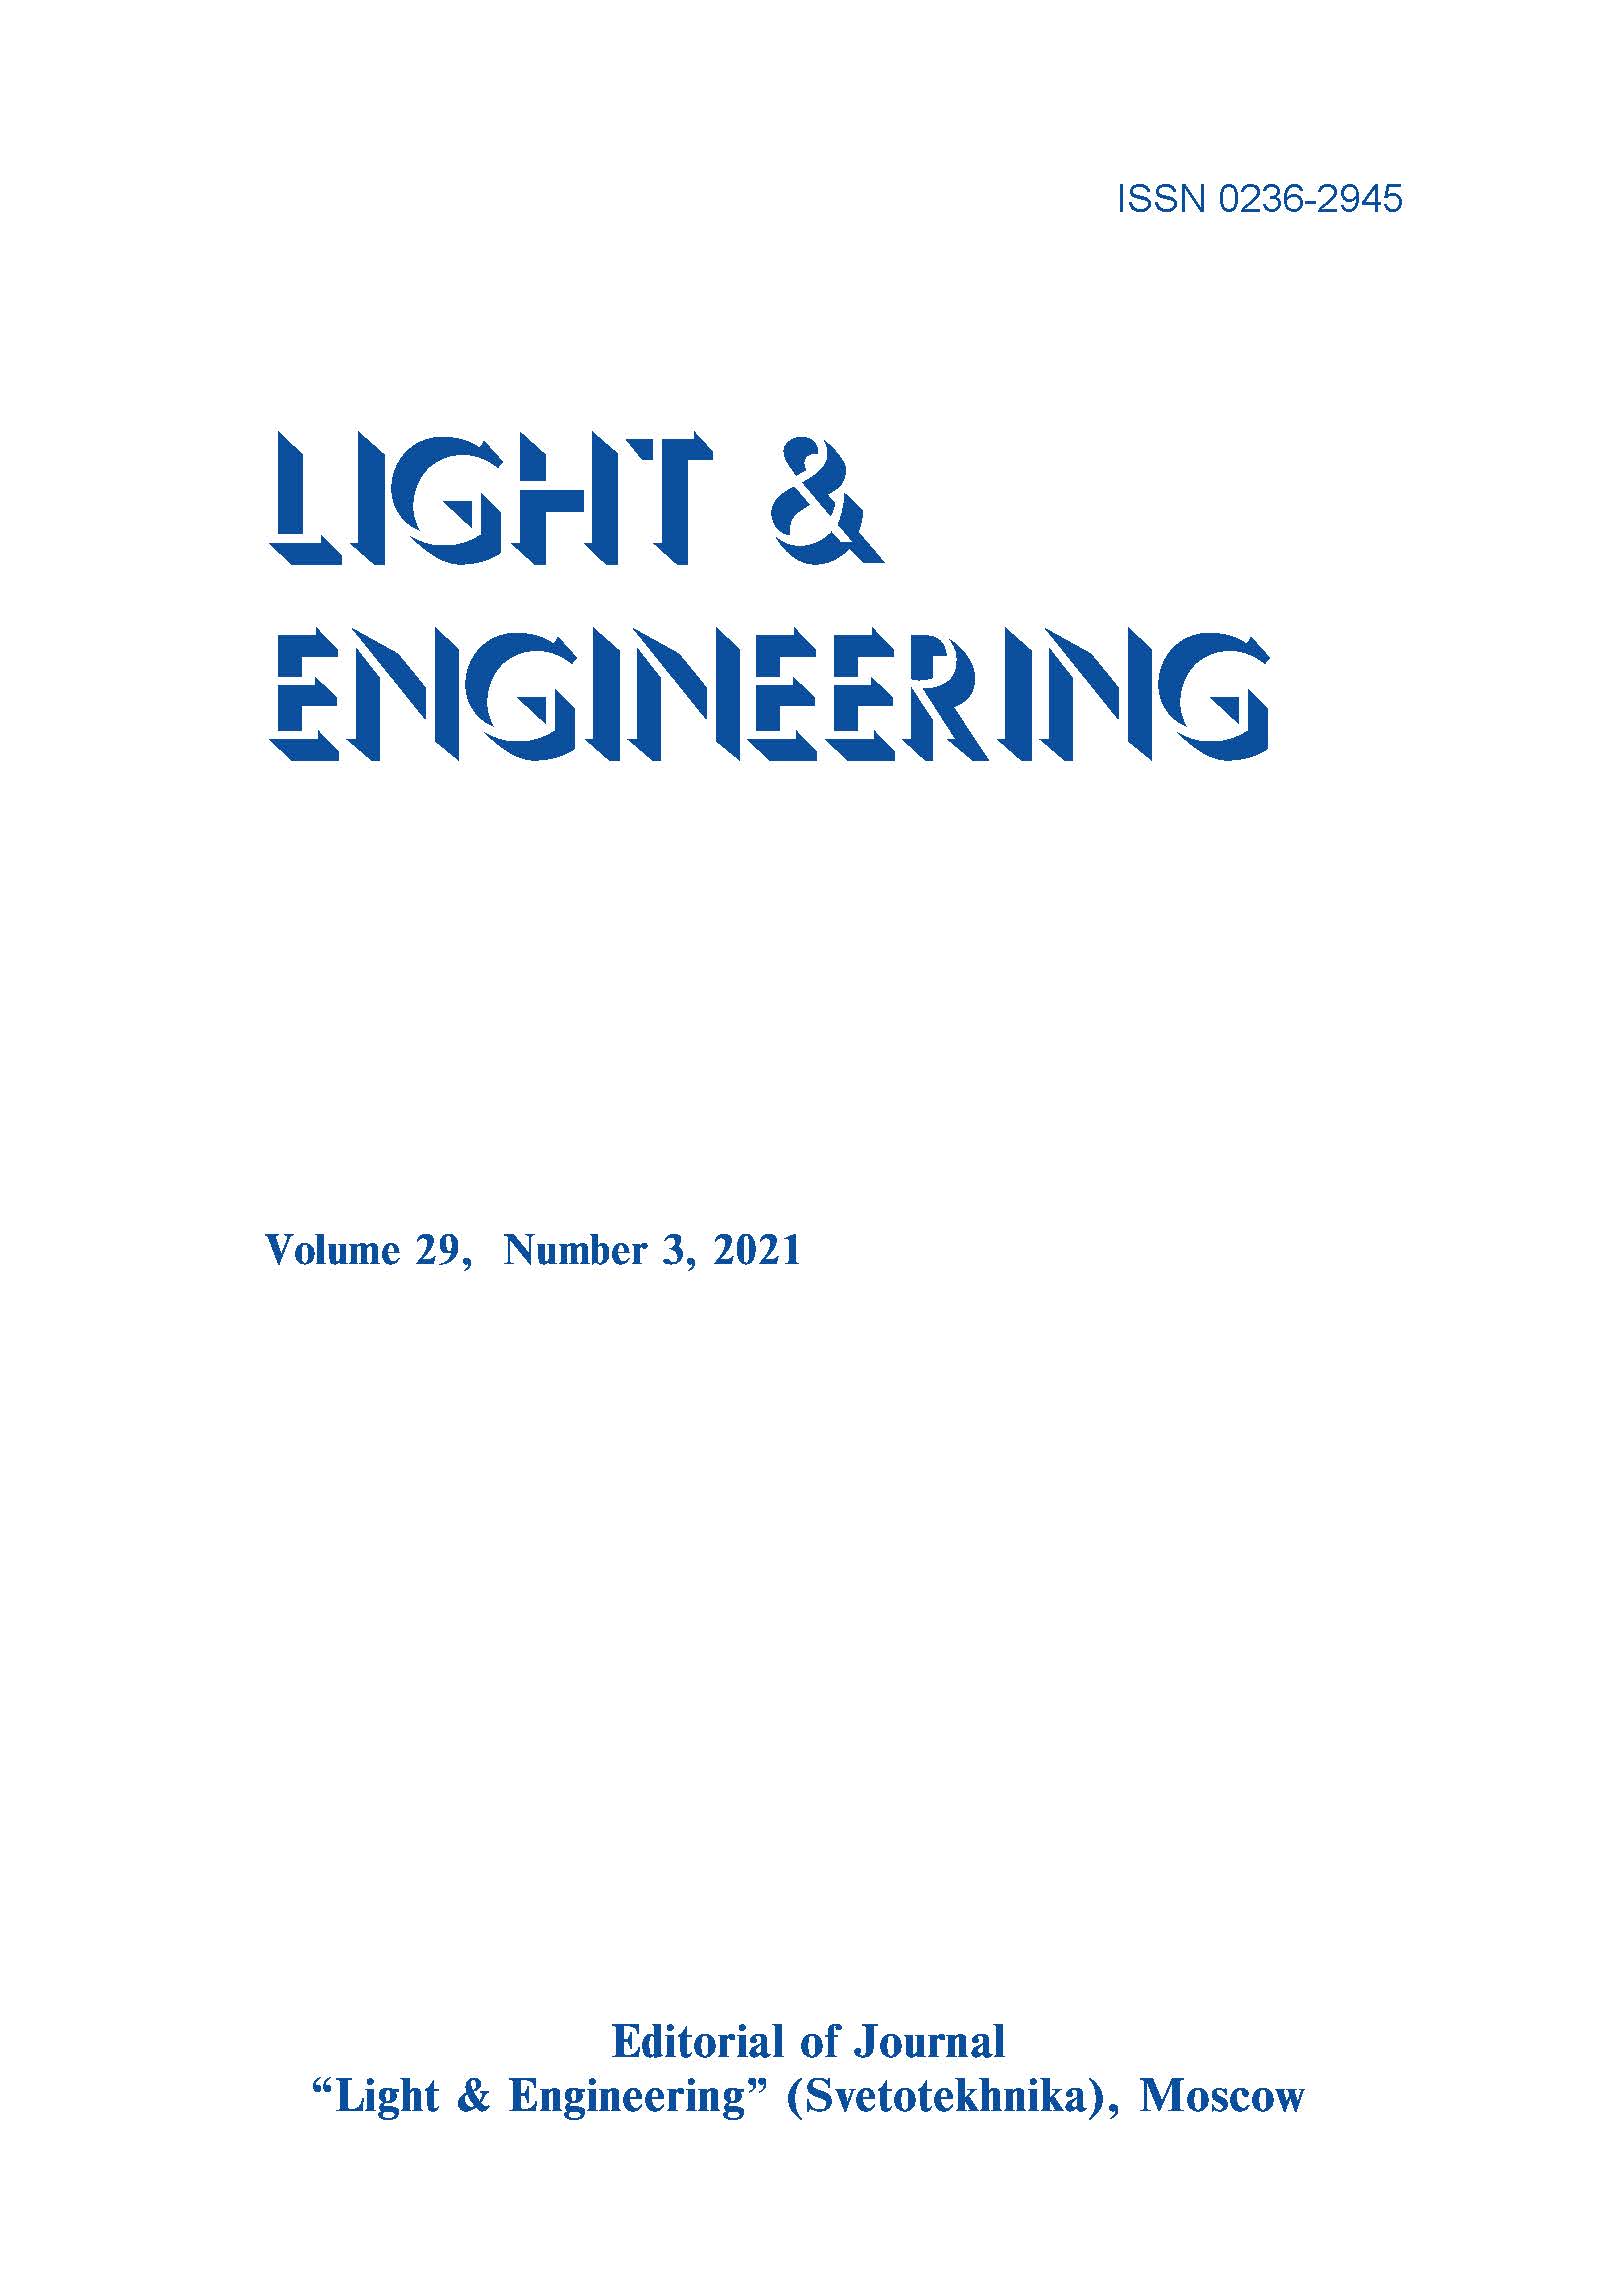 Construction Of A Psychophysical Scale Of Visual Comfort of Lighting Based On A Neural Network: preparation Of The Experiment L&E, Vol. 29, No. 3, 2021